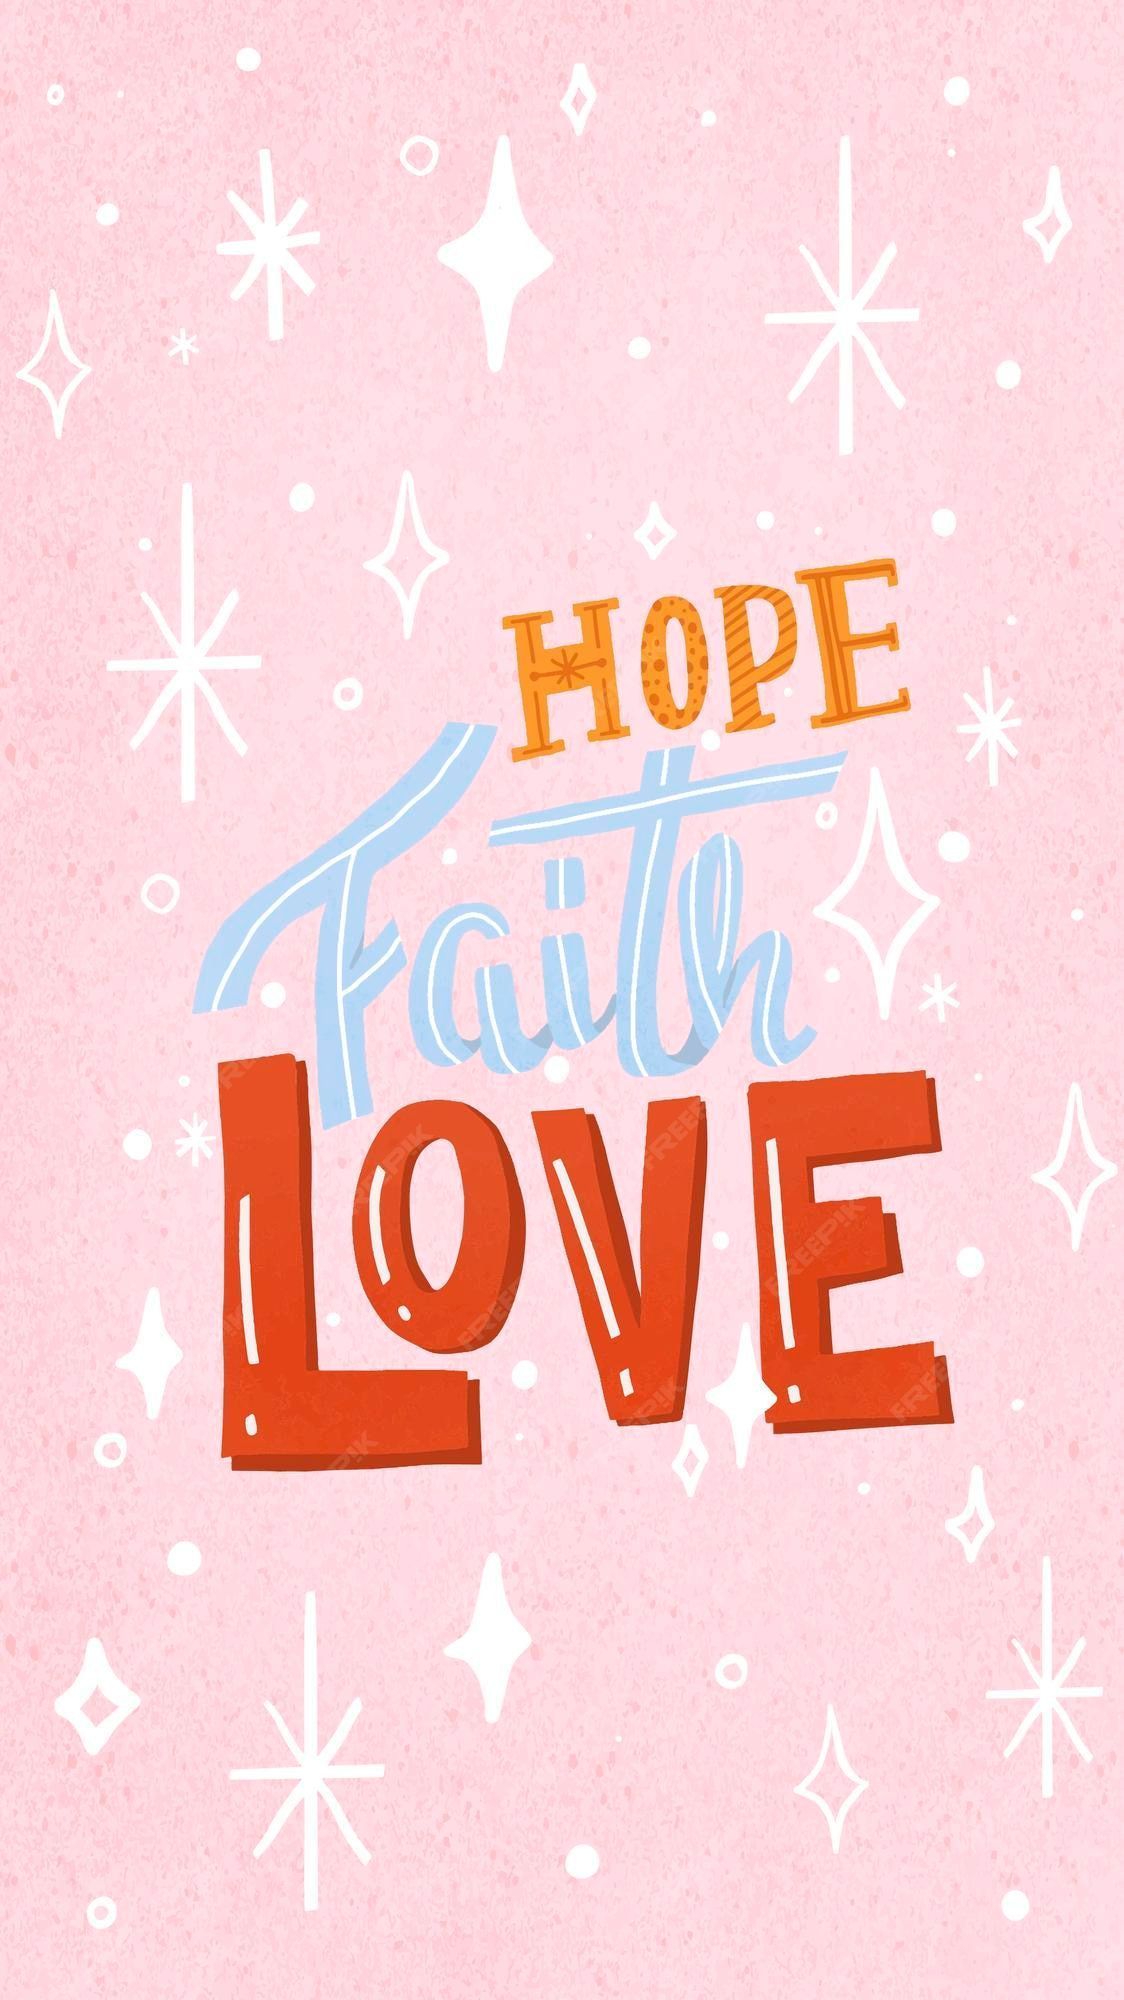 Free Vector. Aesthetic mobile wallpaper, hope, faith & love typography vector